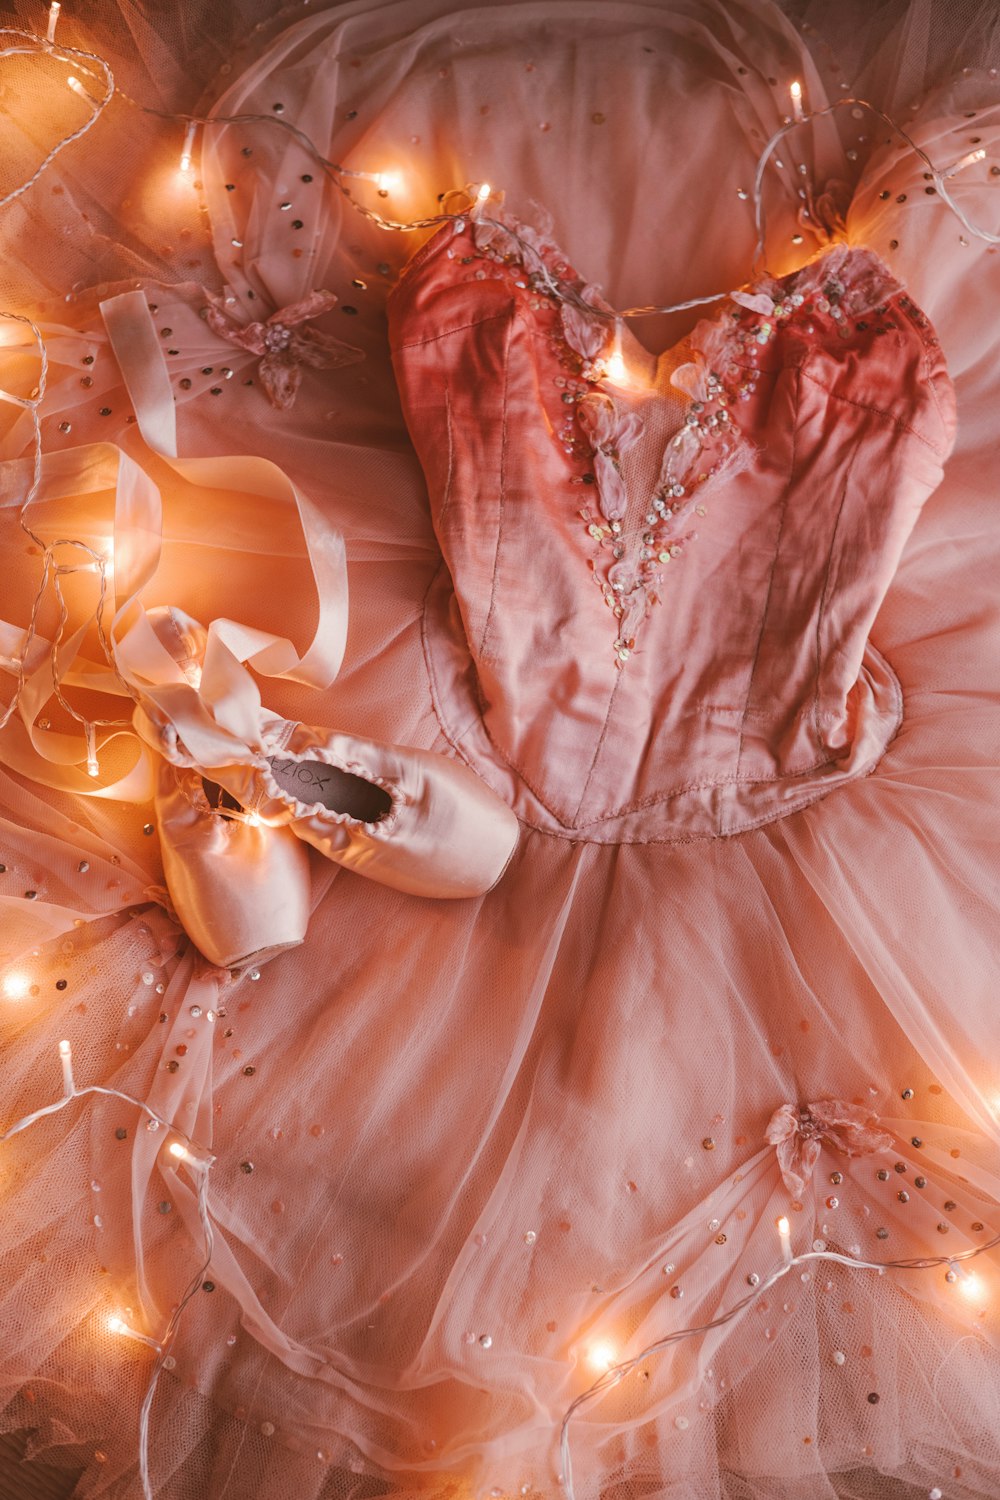 a ballerina's dress and ballet shoes are laying on the floor